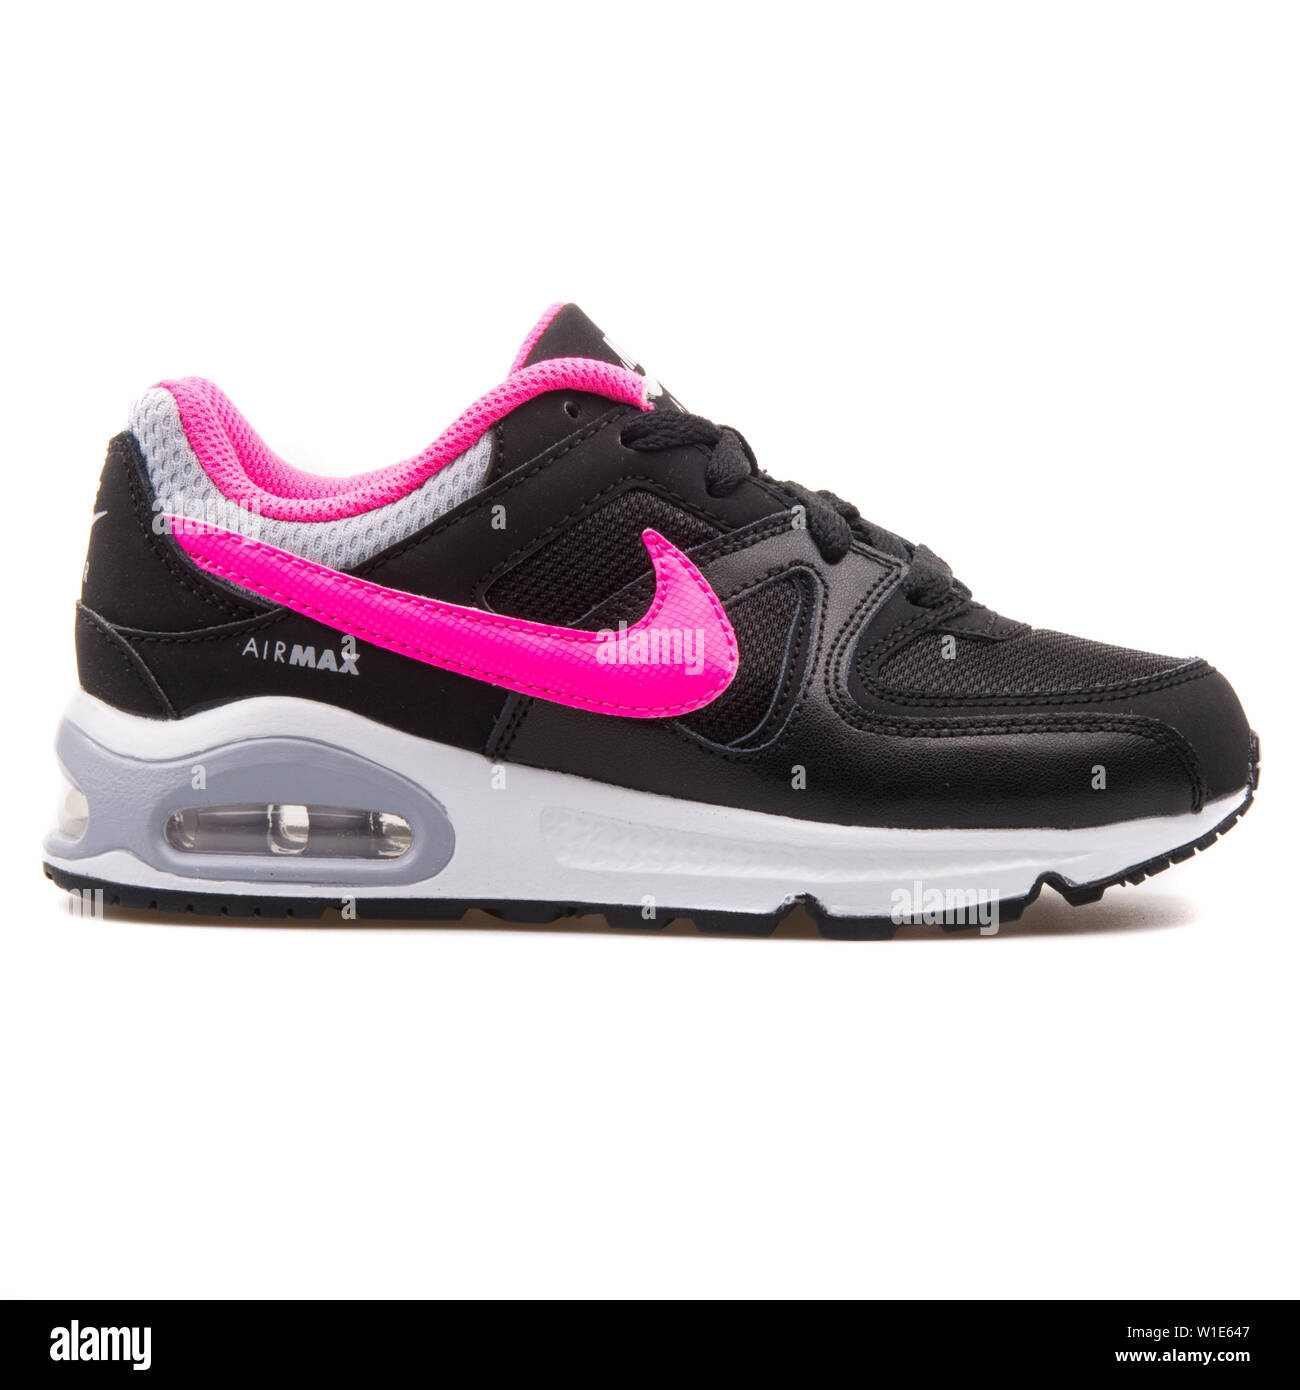 VIENNA, AUSTRIA - AUGUST 25, Nike Air Max Command black and pink sneaker white background Stock Photo - Alamy